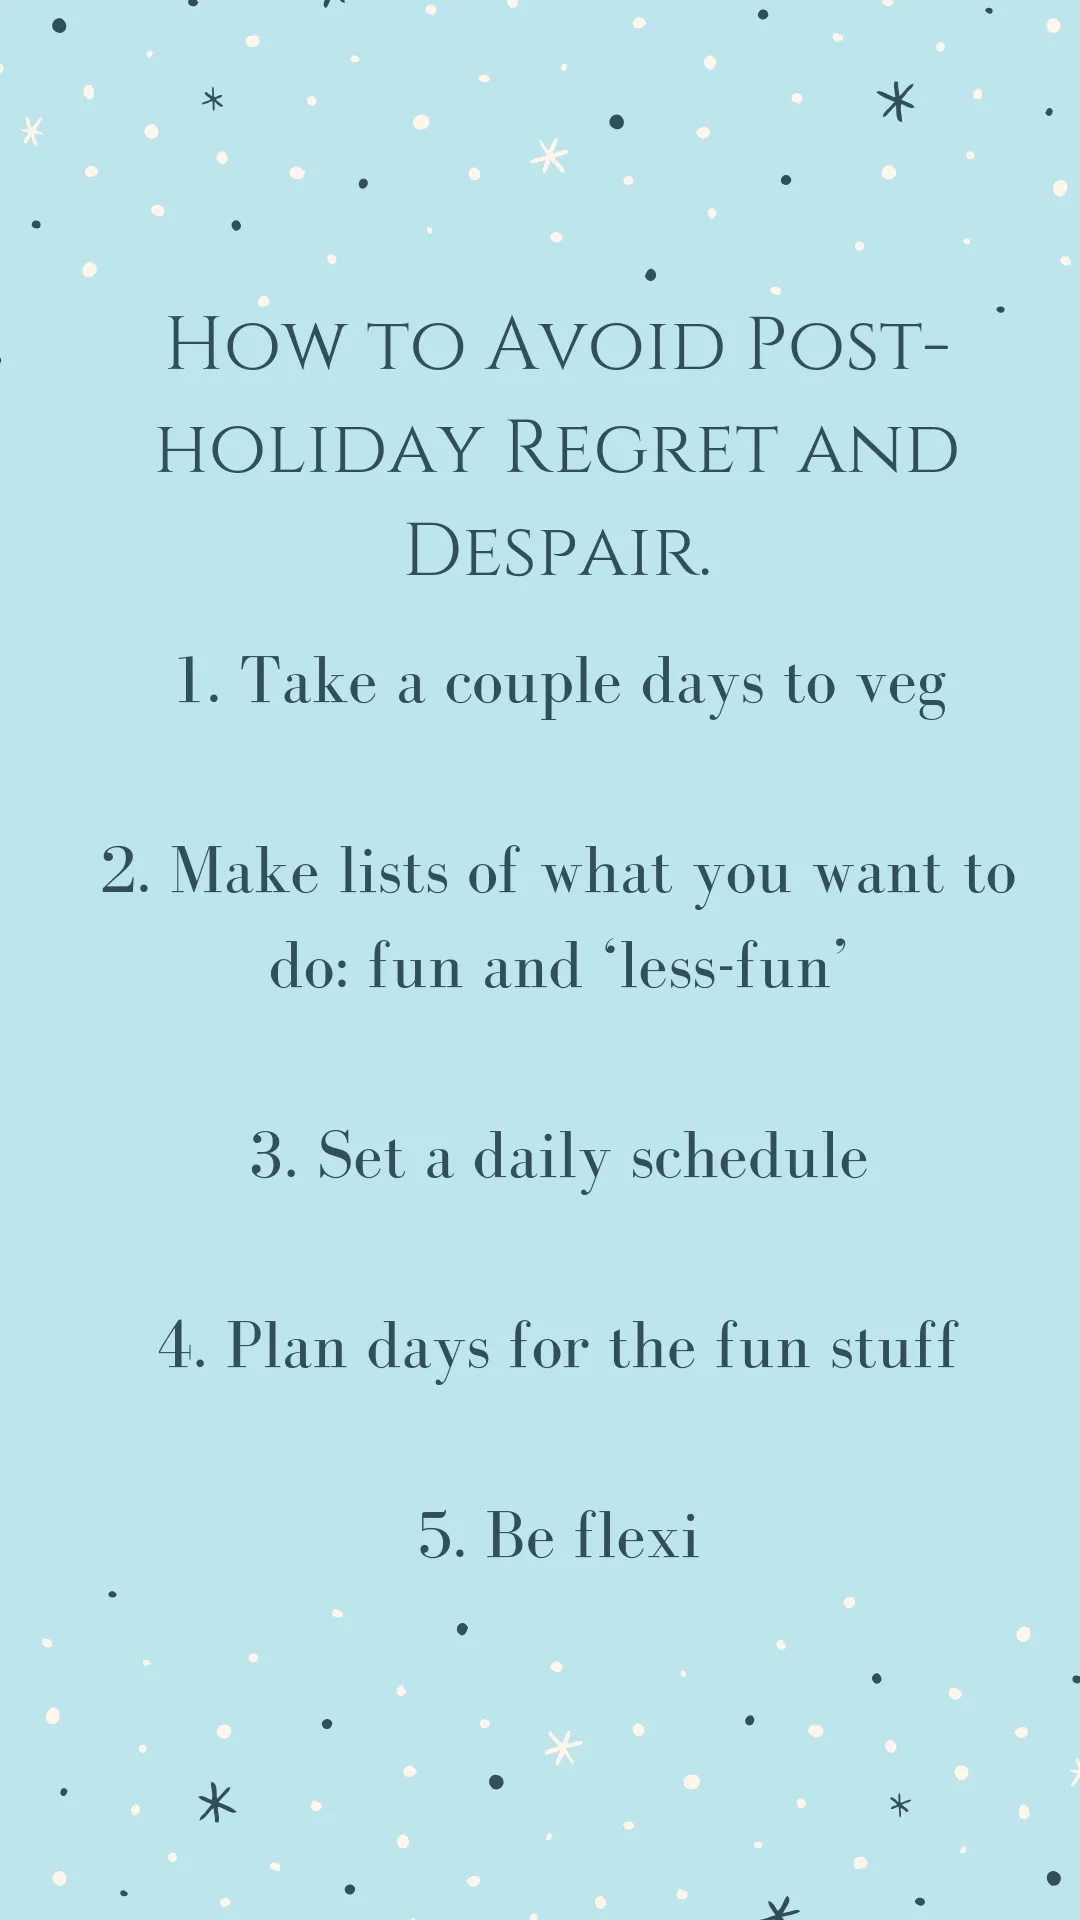 Avoid Post-Holiday Regret and Despair